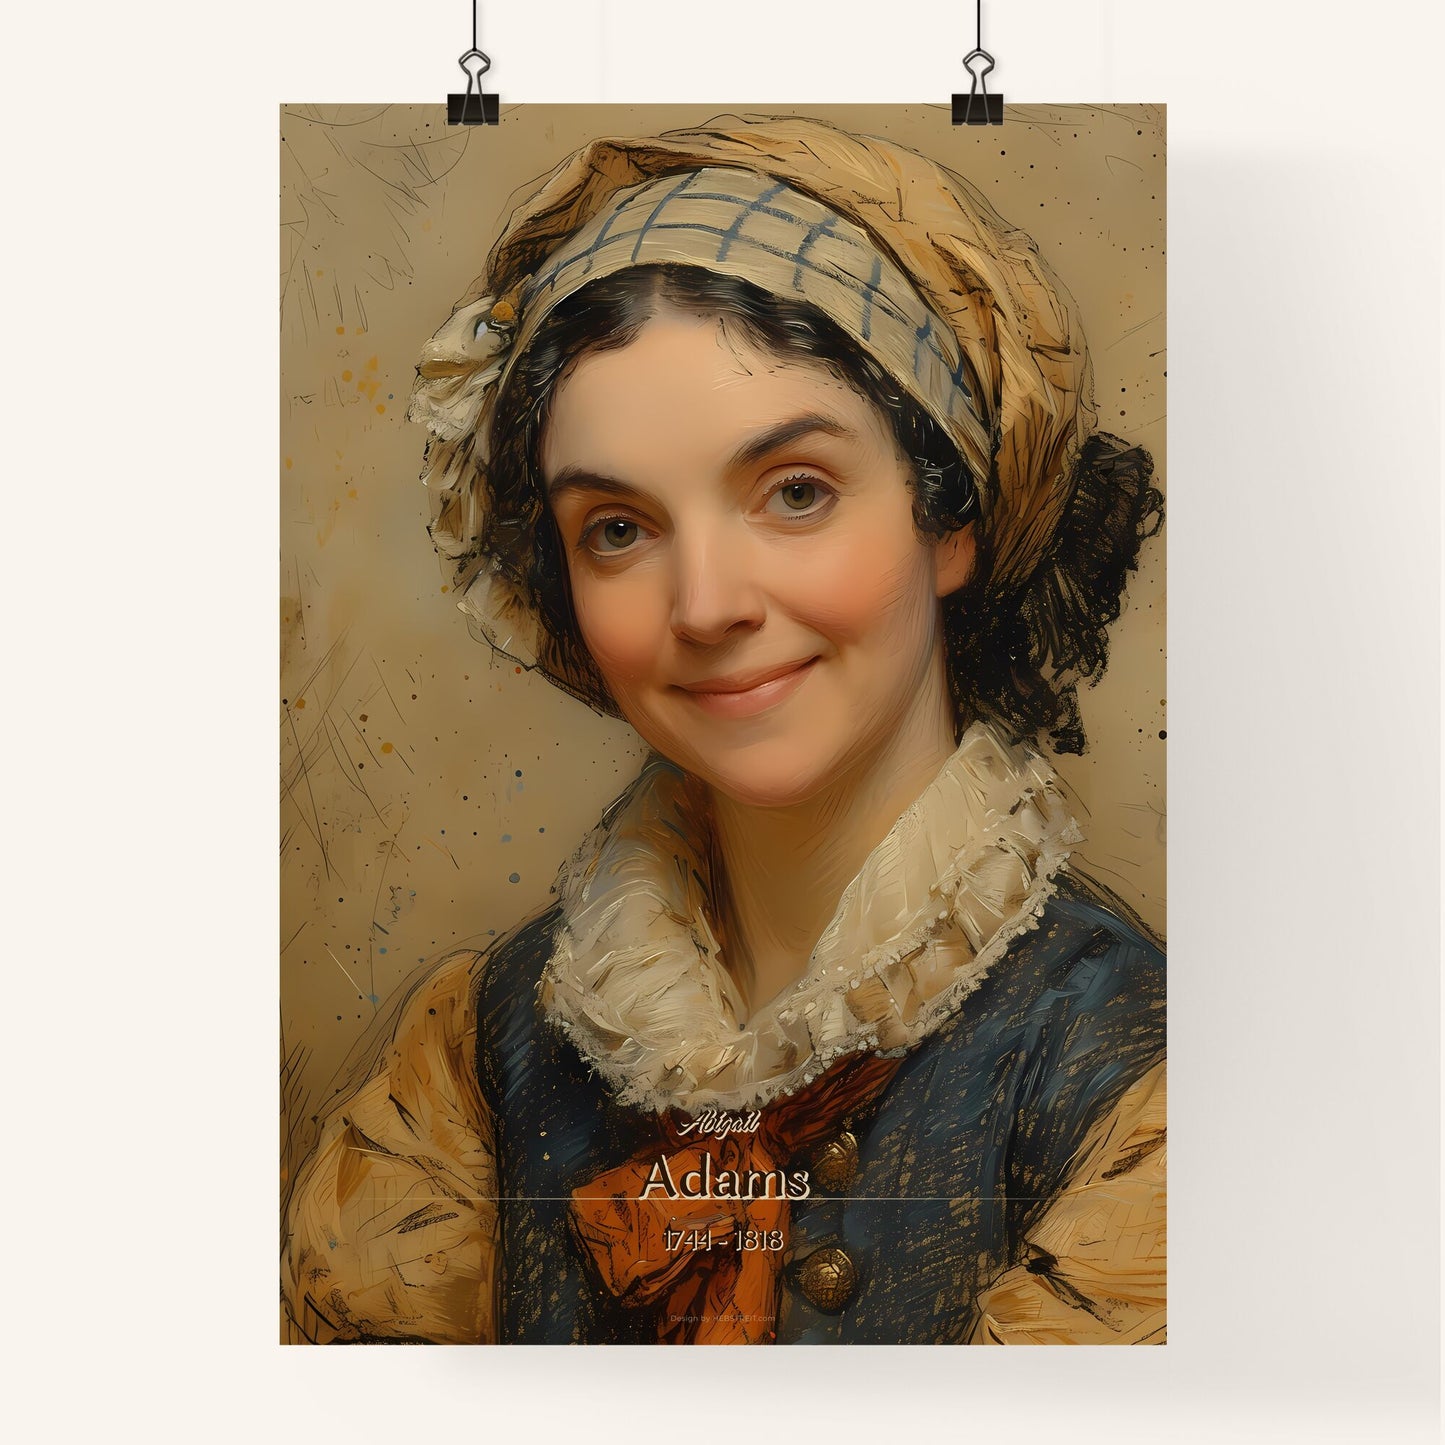 Abigail, Adams, 1744 - 1818, A Poster of a woman wearing a head scarf and a vest Default Title